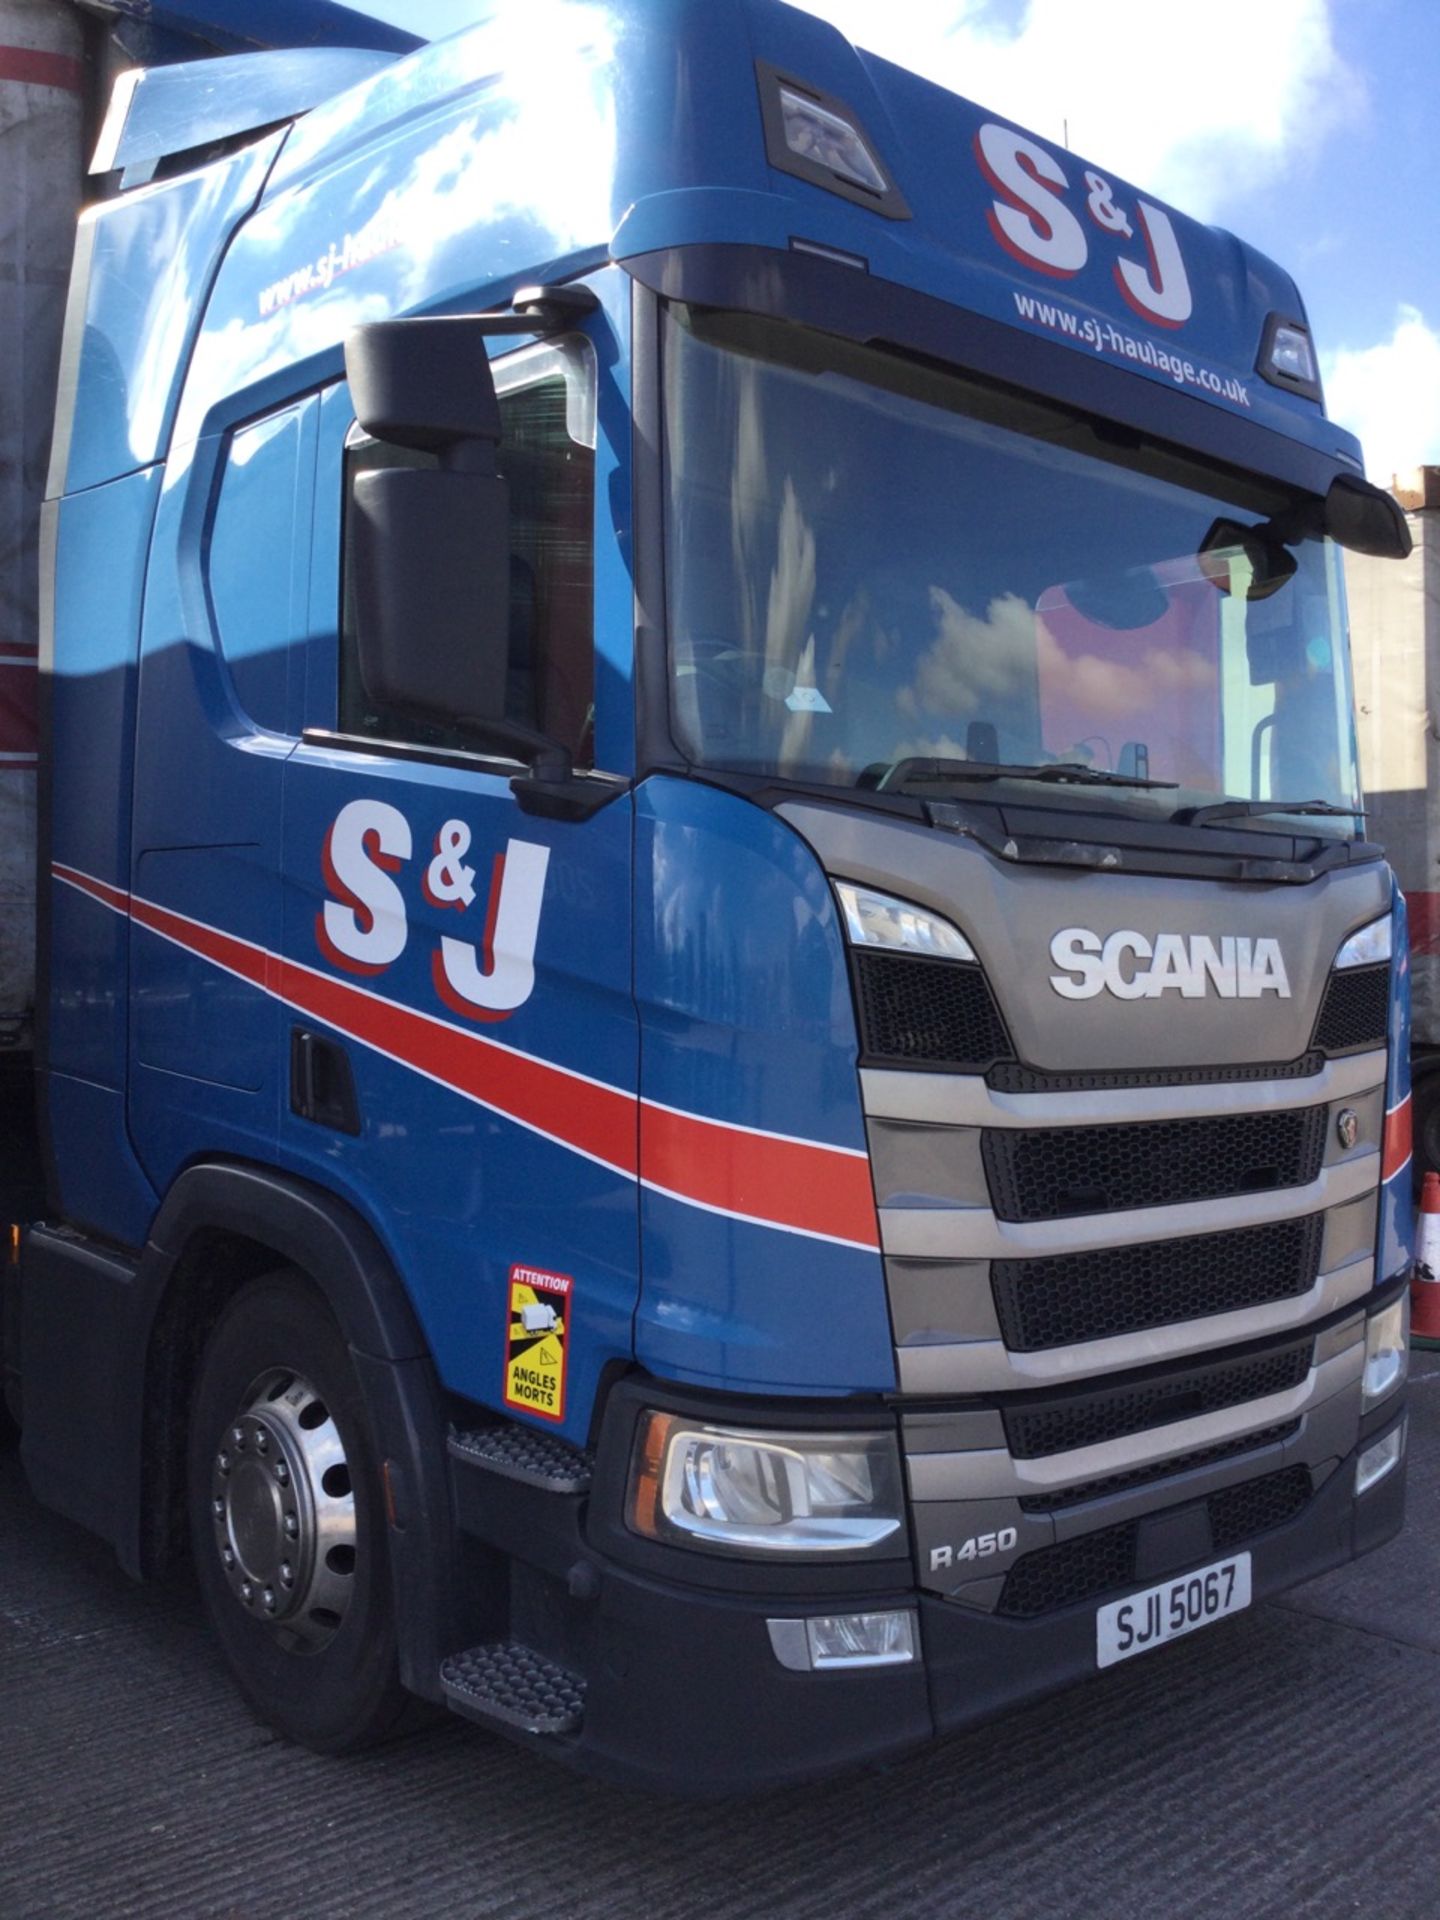 Scania R450-SERIES 6x2 Tractor Unit With Mid-Lift Axle, Sleeper Cab Mot Until 31/05/24546231kms, Reg - Image 2 of 3